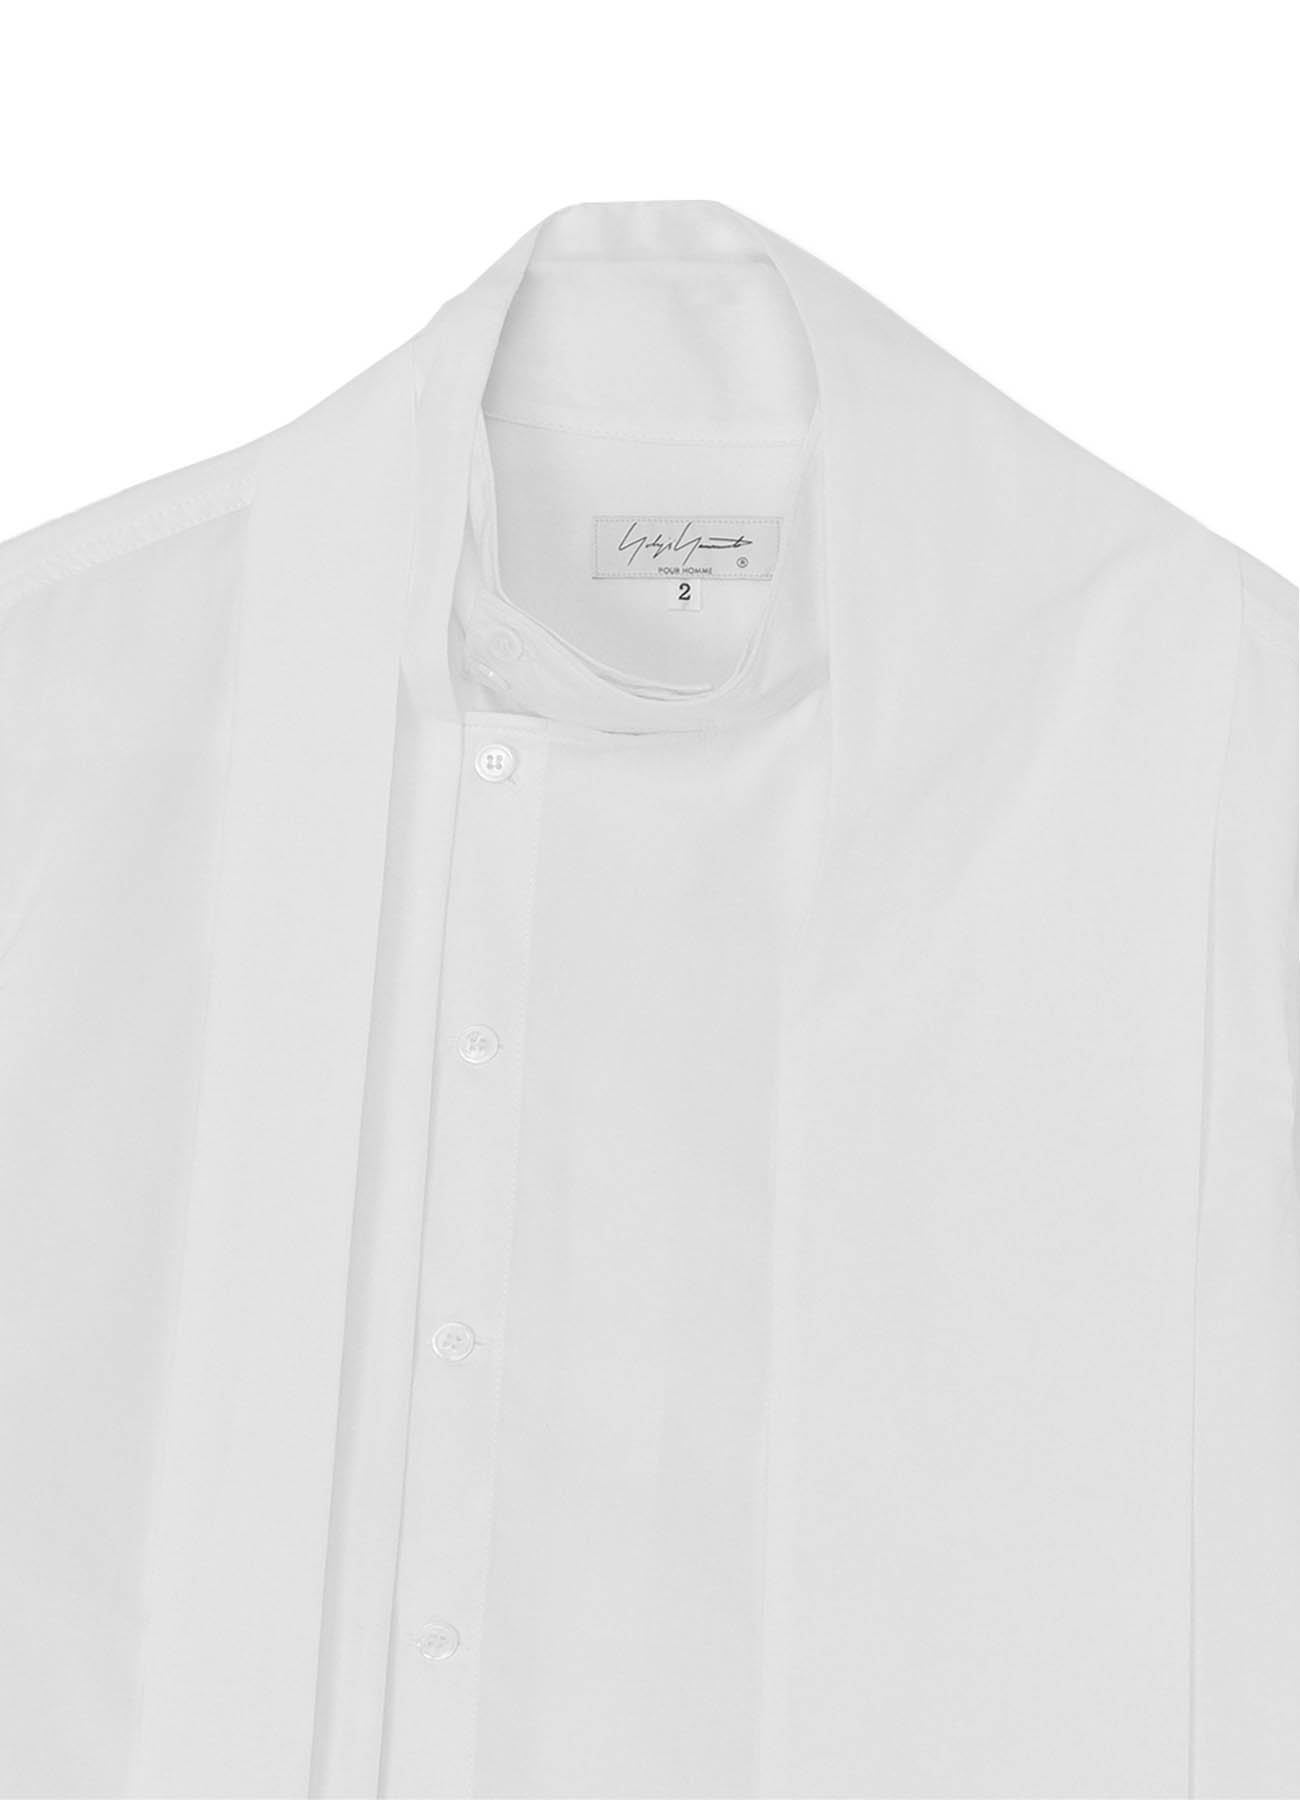 DOUBLE LEFT PANEL STAND COLLAR SHIRT